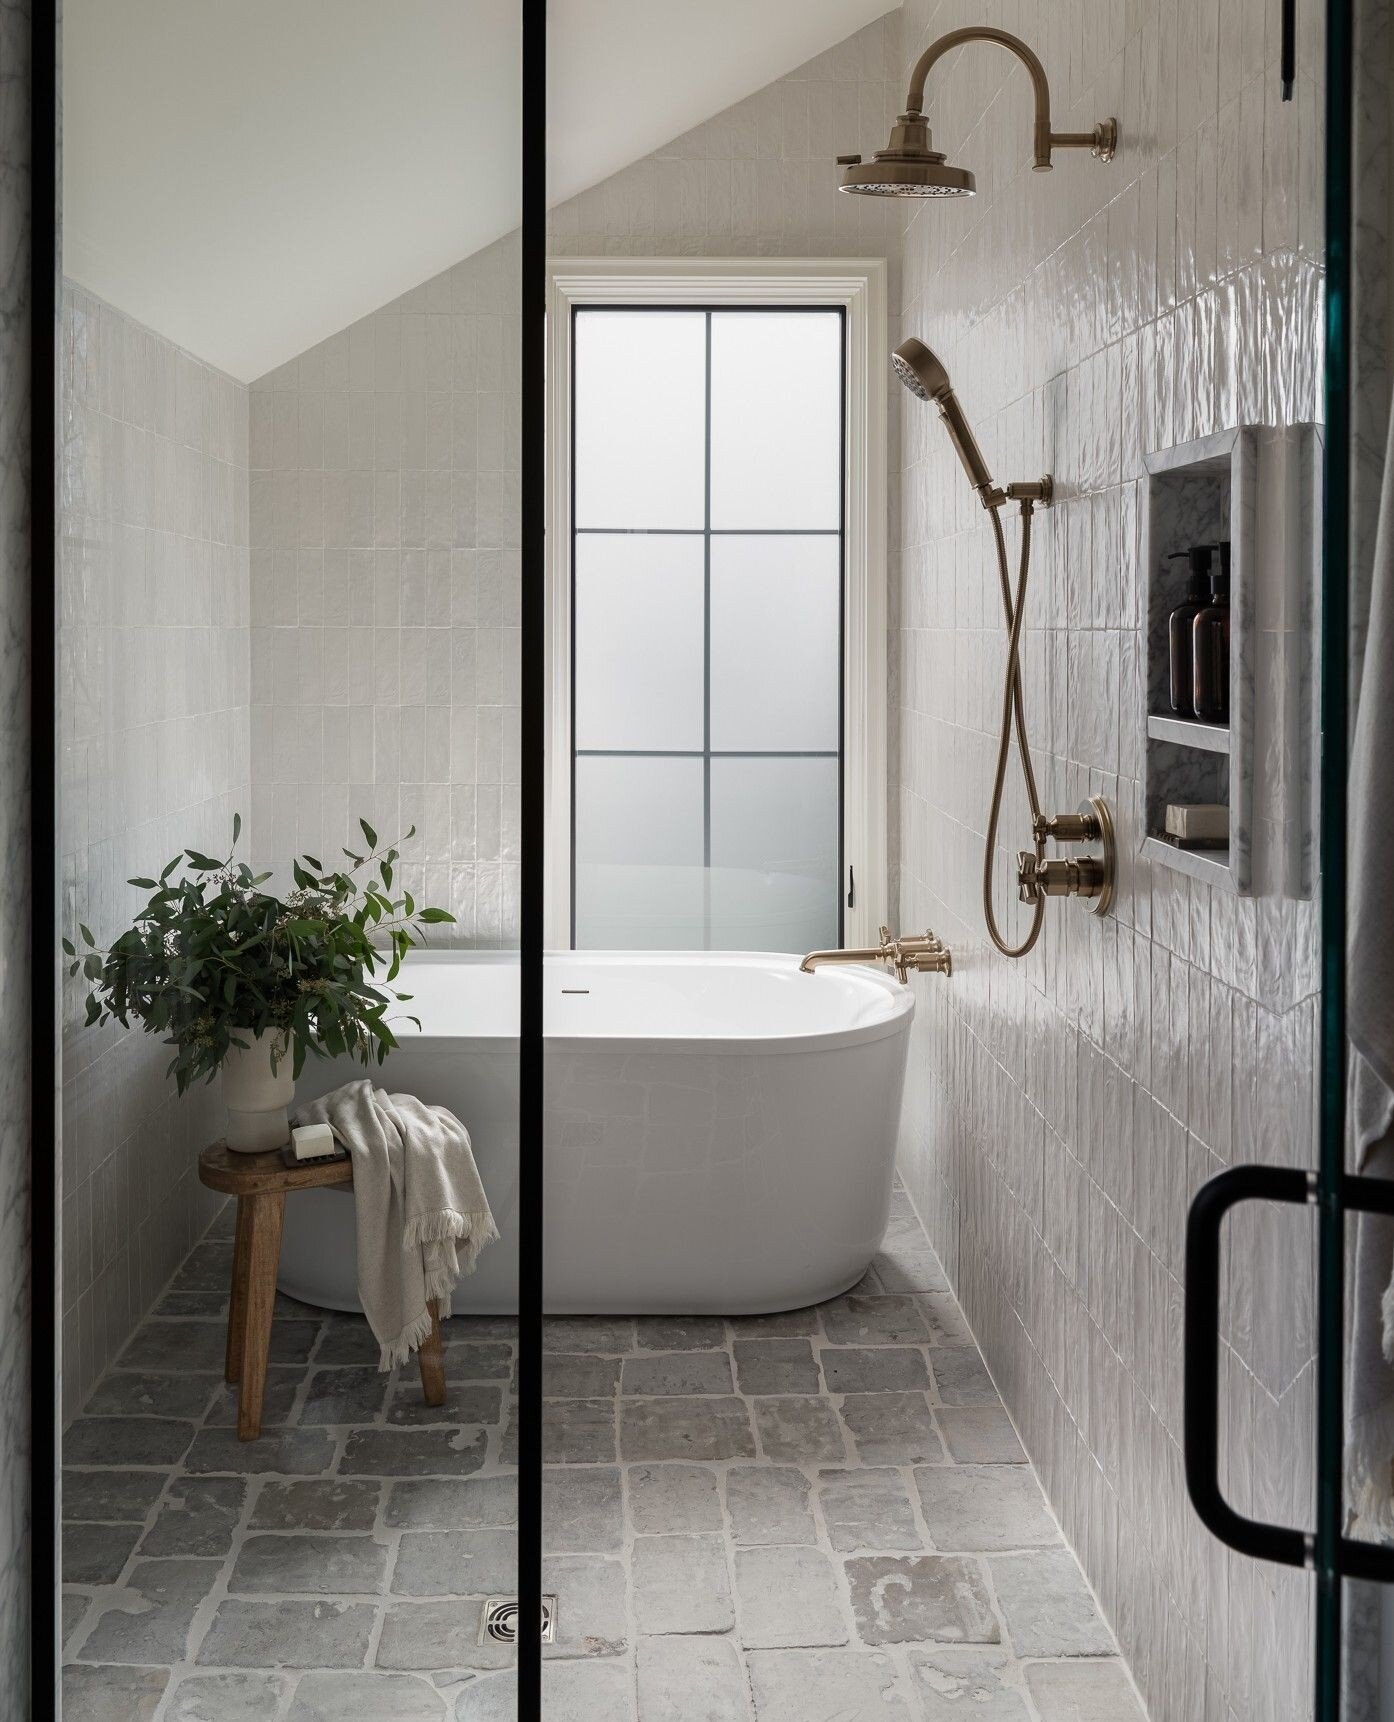 The SD Haven master bath features reclaimed cobblestone, soaking tub and brass fixtures. I think it creates a serene and relaxing atmosphere in this bath.⁠
⁠
⁠
#aanovodesignbuild | Photo by @sarahshieldsphoto 📷⁠
⁠
#sdhaven #bathroomdesign #showerdes